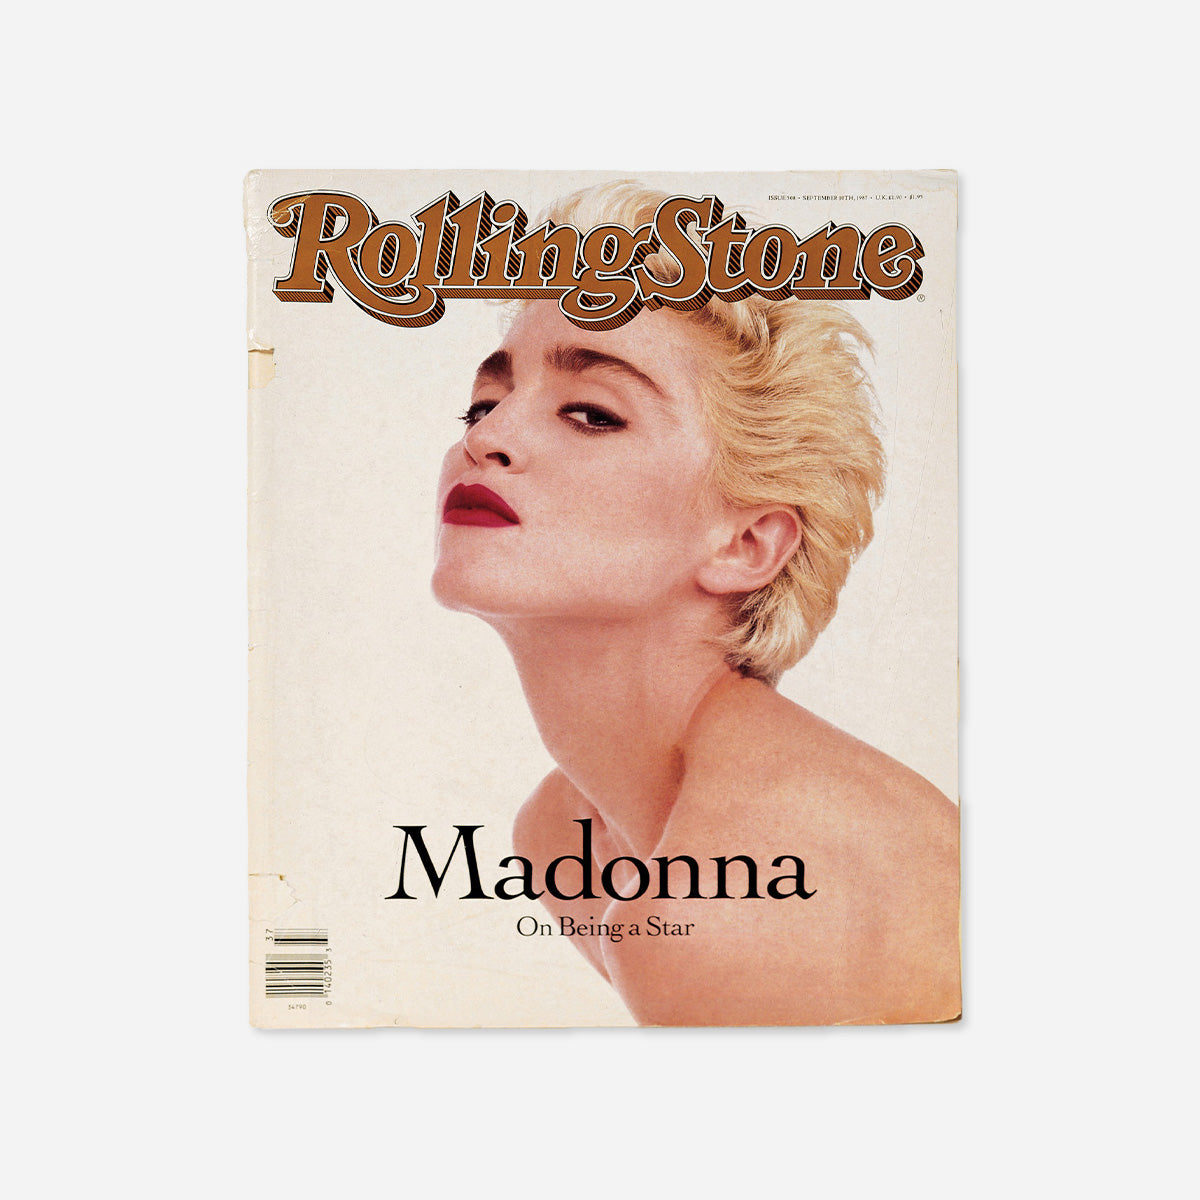 Rolling Stone Magazine September 10, 1987 Featuring Madonna (Issue 508)